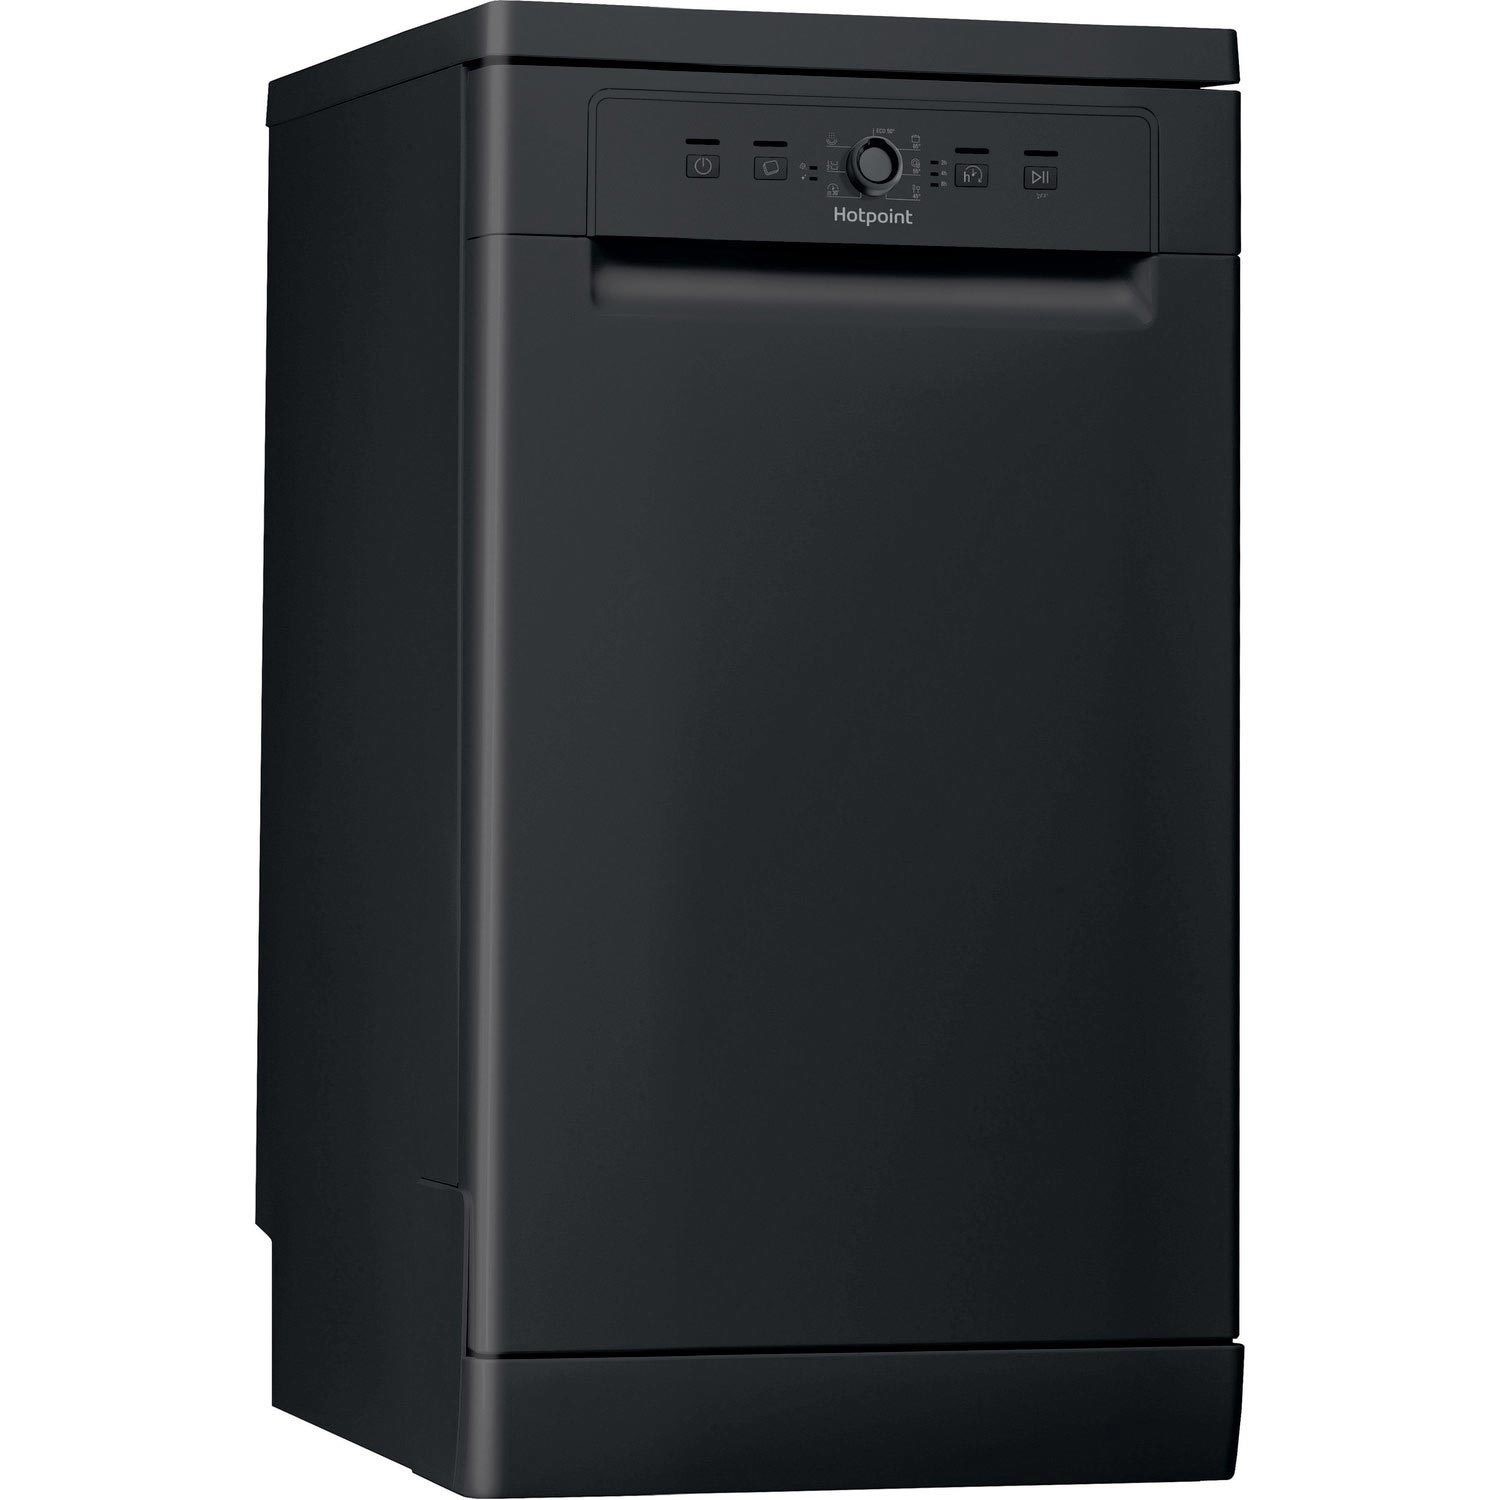 Hotpoint HSFE1B19 Freestanding Dishwasher, A+ Energy Rating